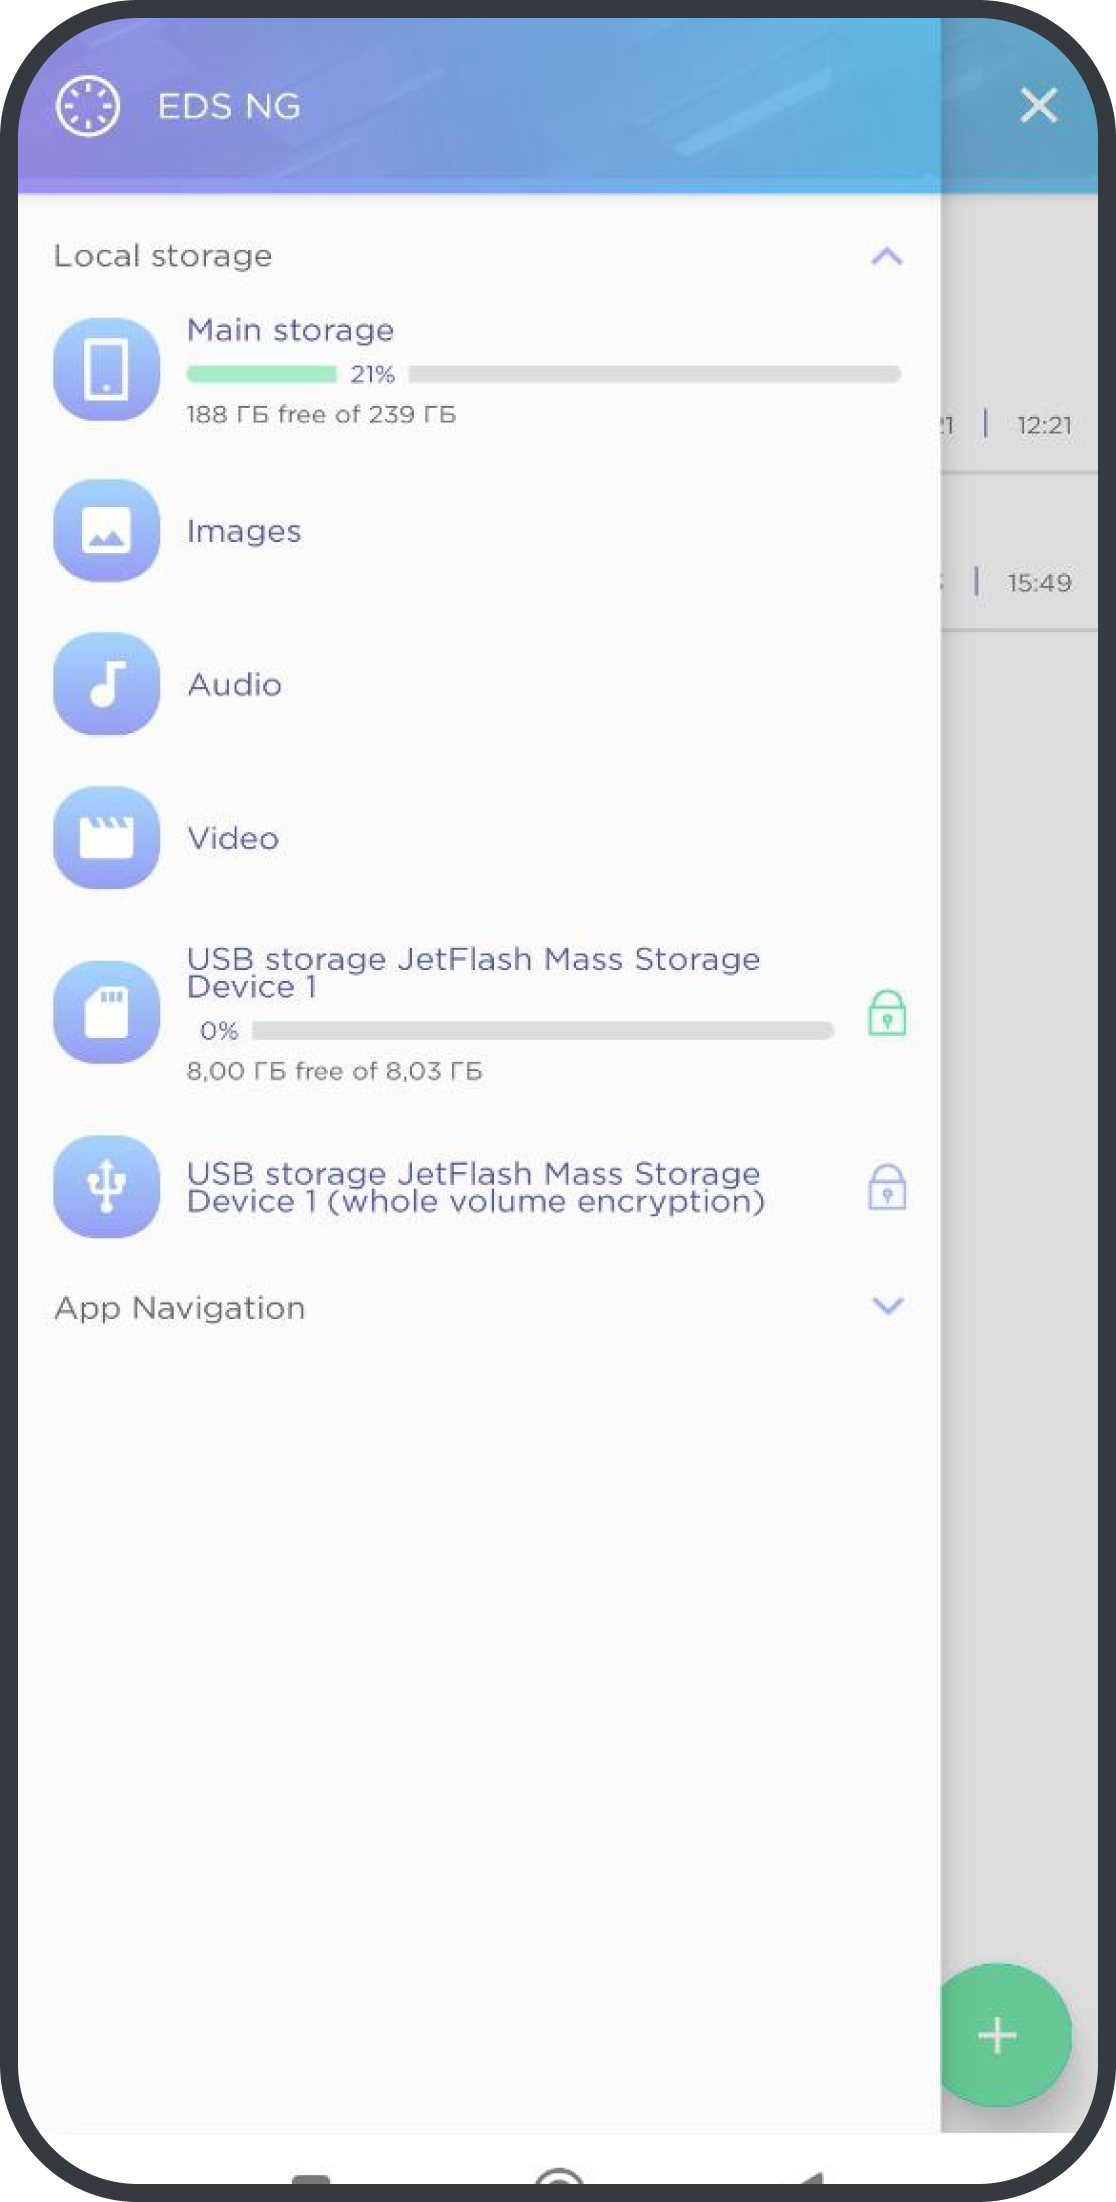 EDS file manager interface displaying files and folders within an encrypted storage container.